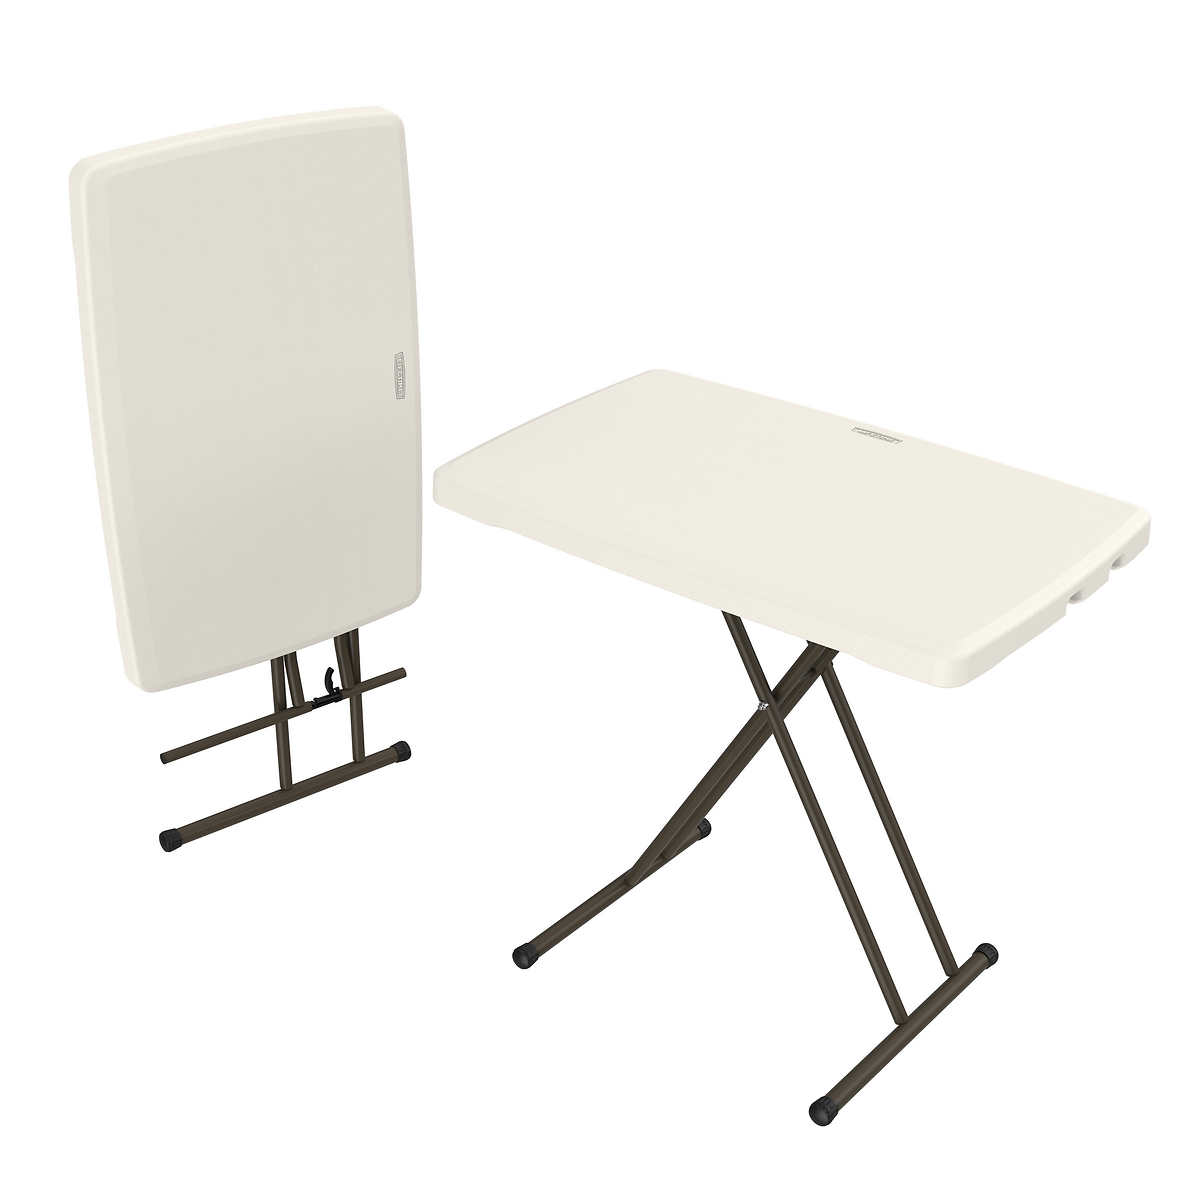 Lifetime 30 Inch Personal Table 2 Pack, Lifetime Round Tables Costco